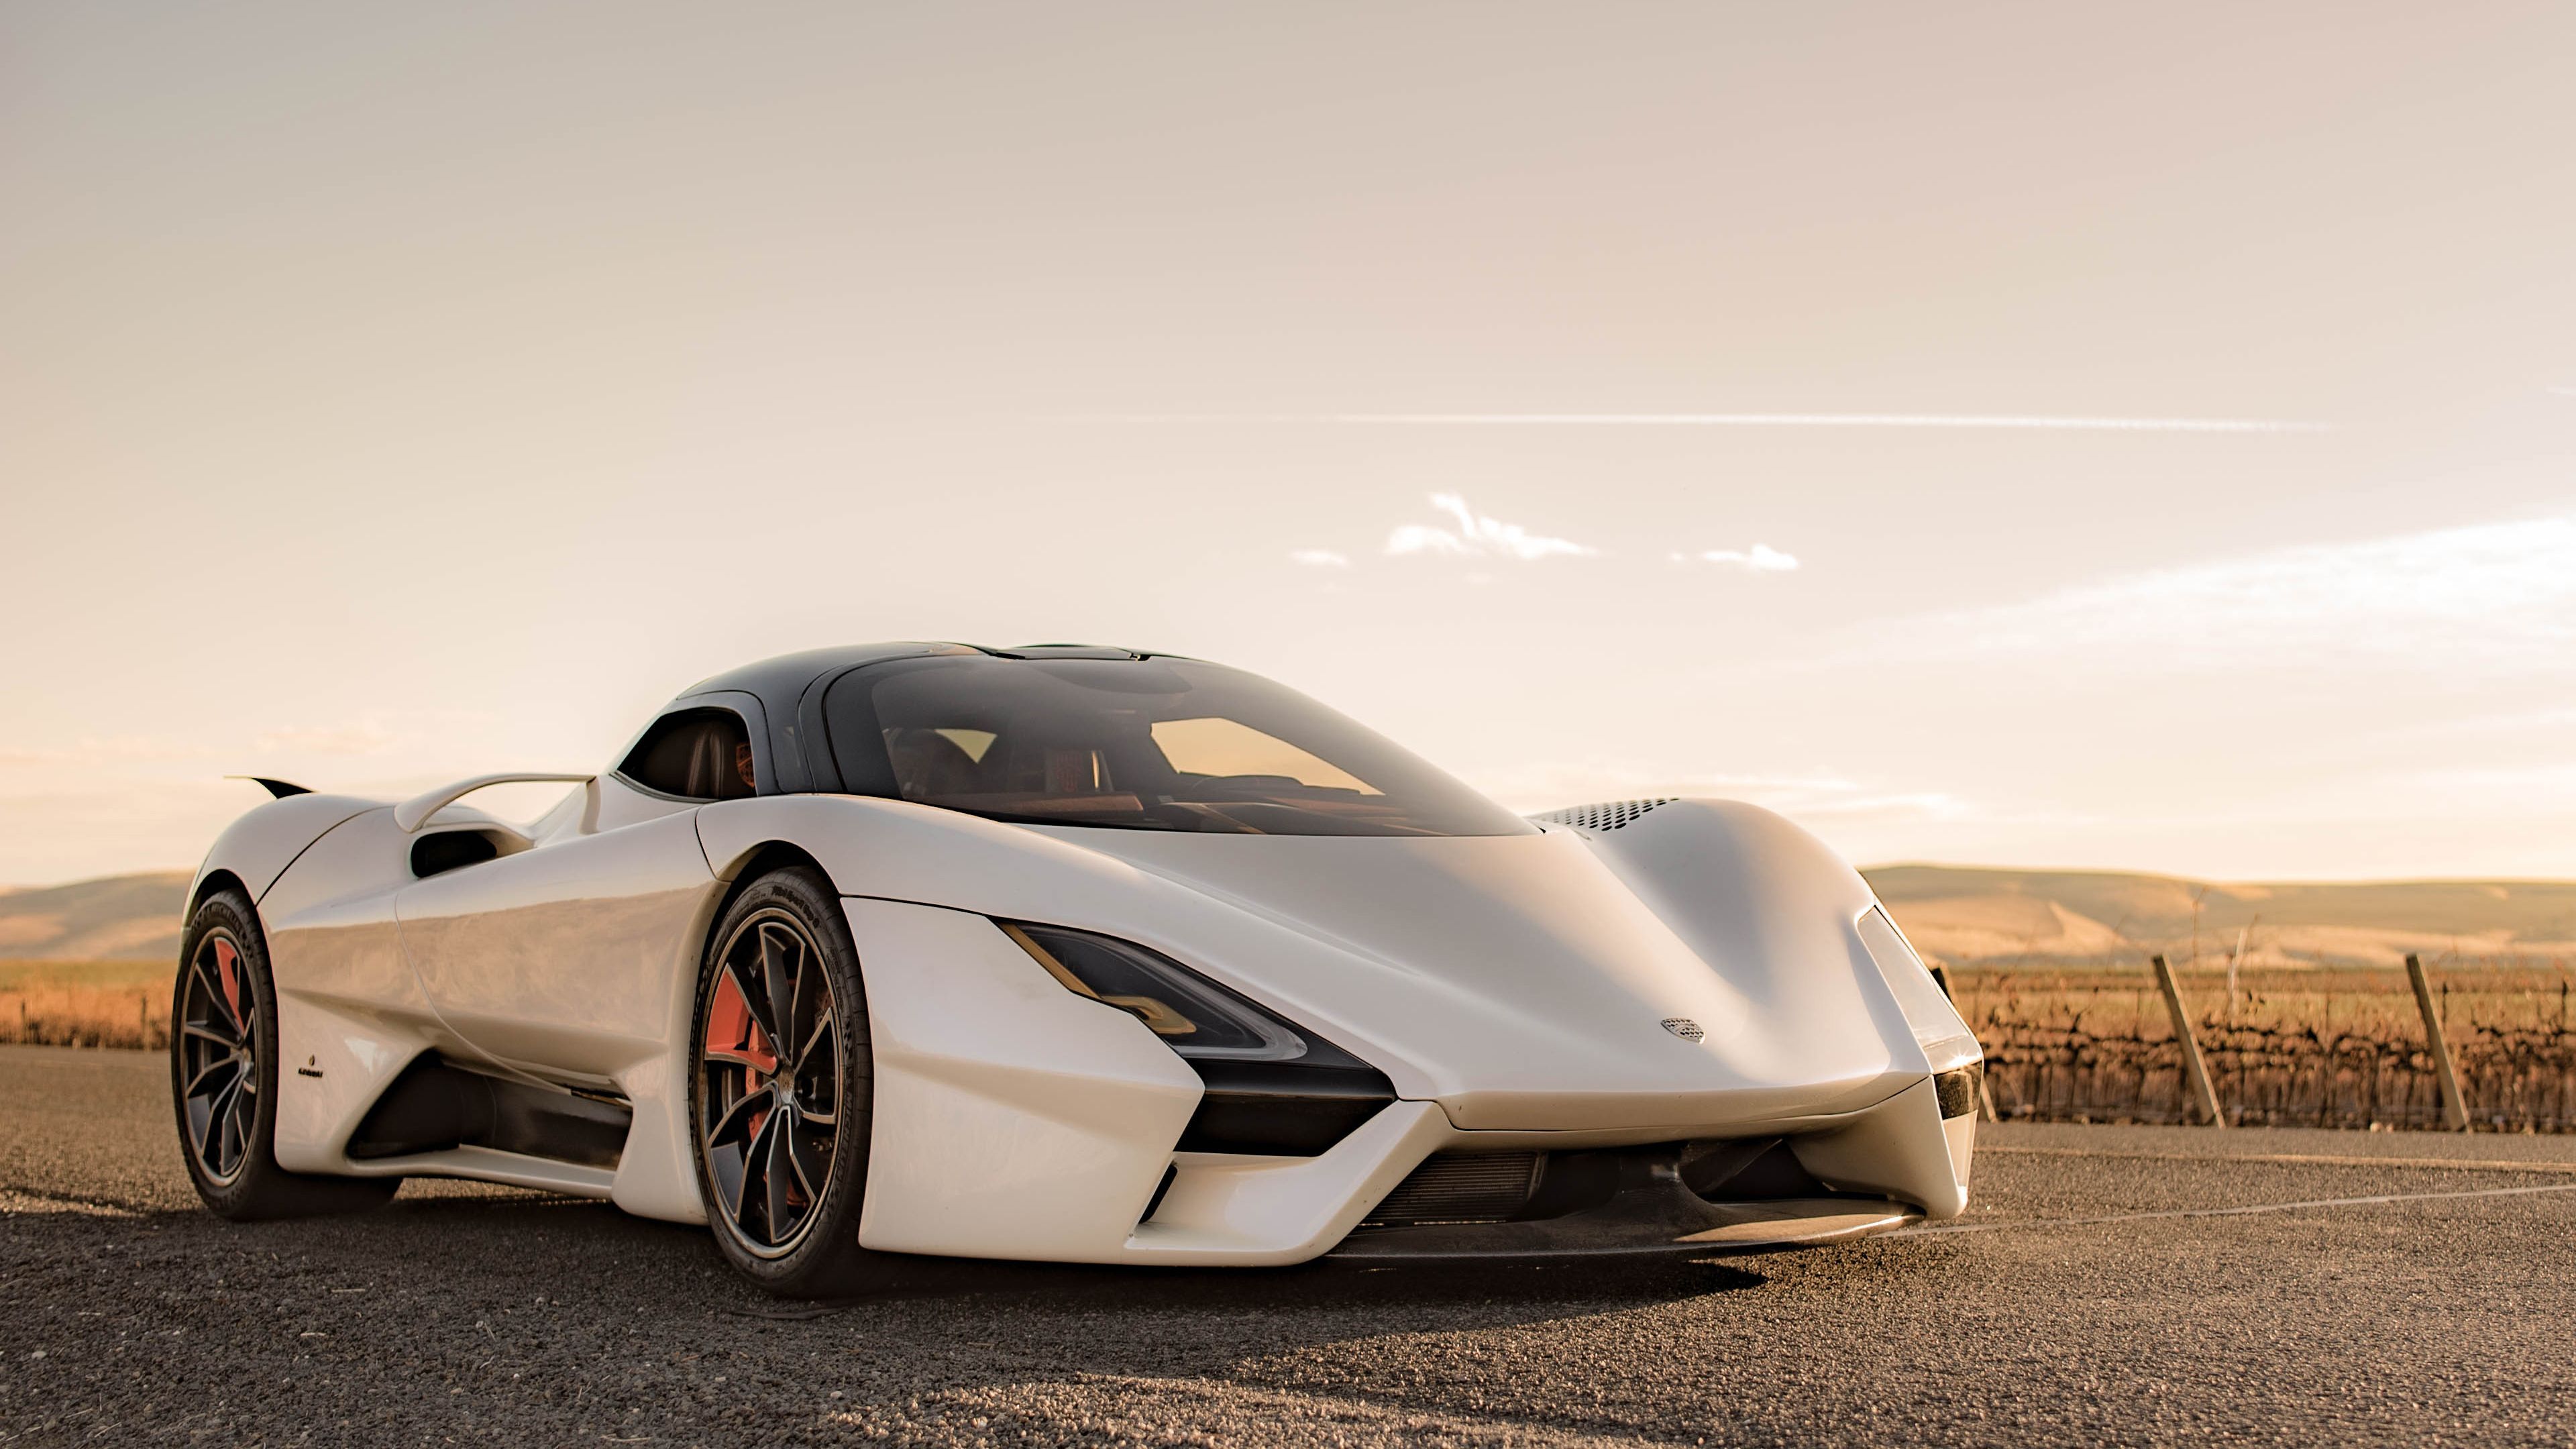 The 2020 SSC Tuatara is versatile and efficient.